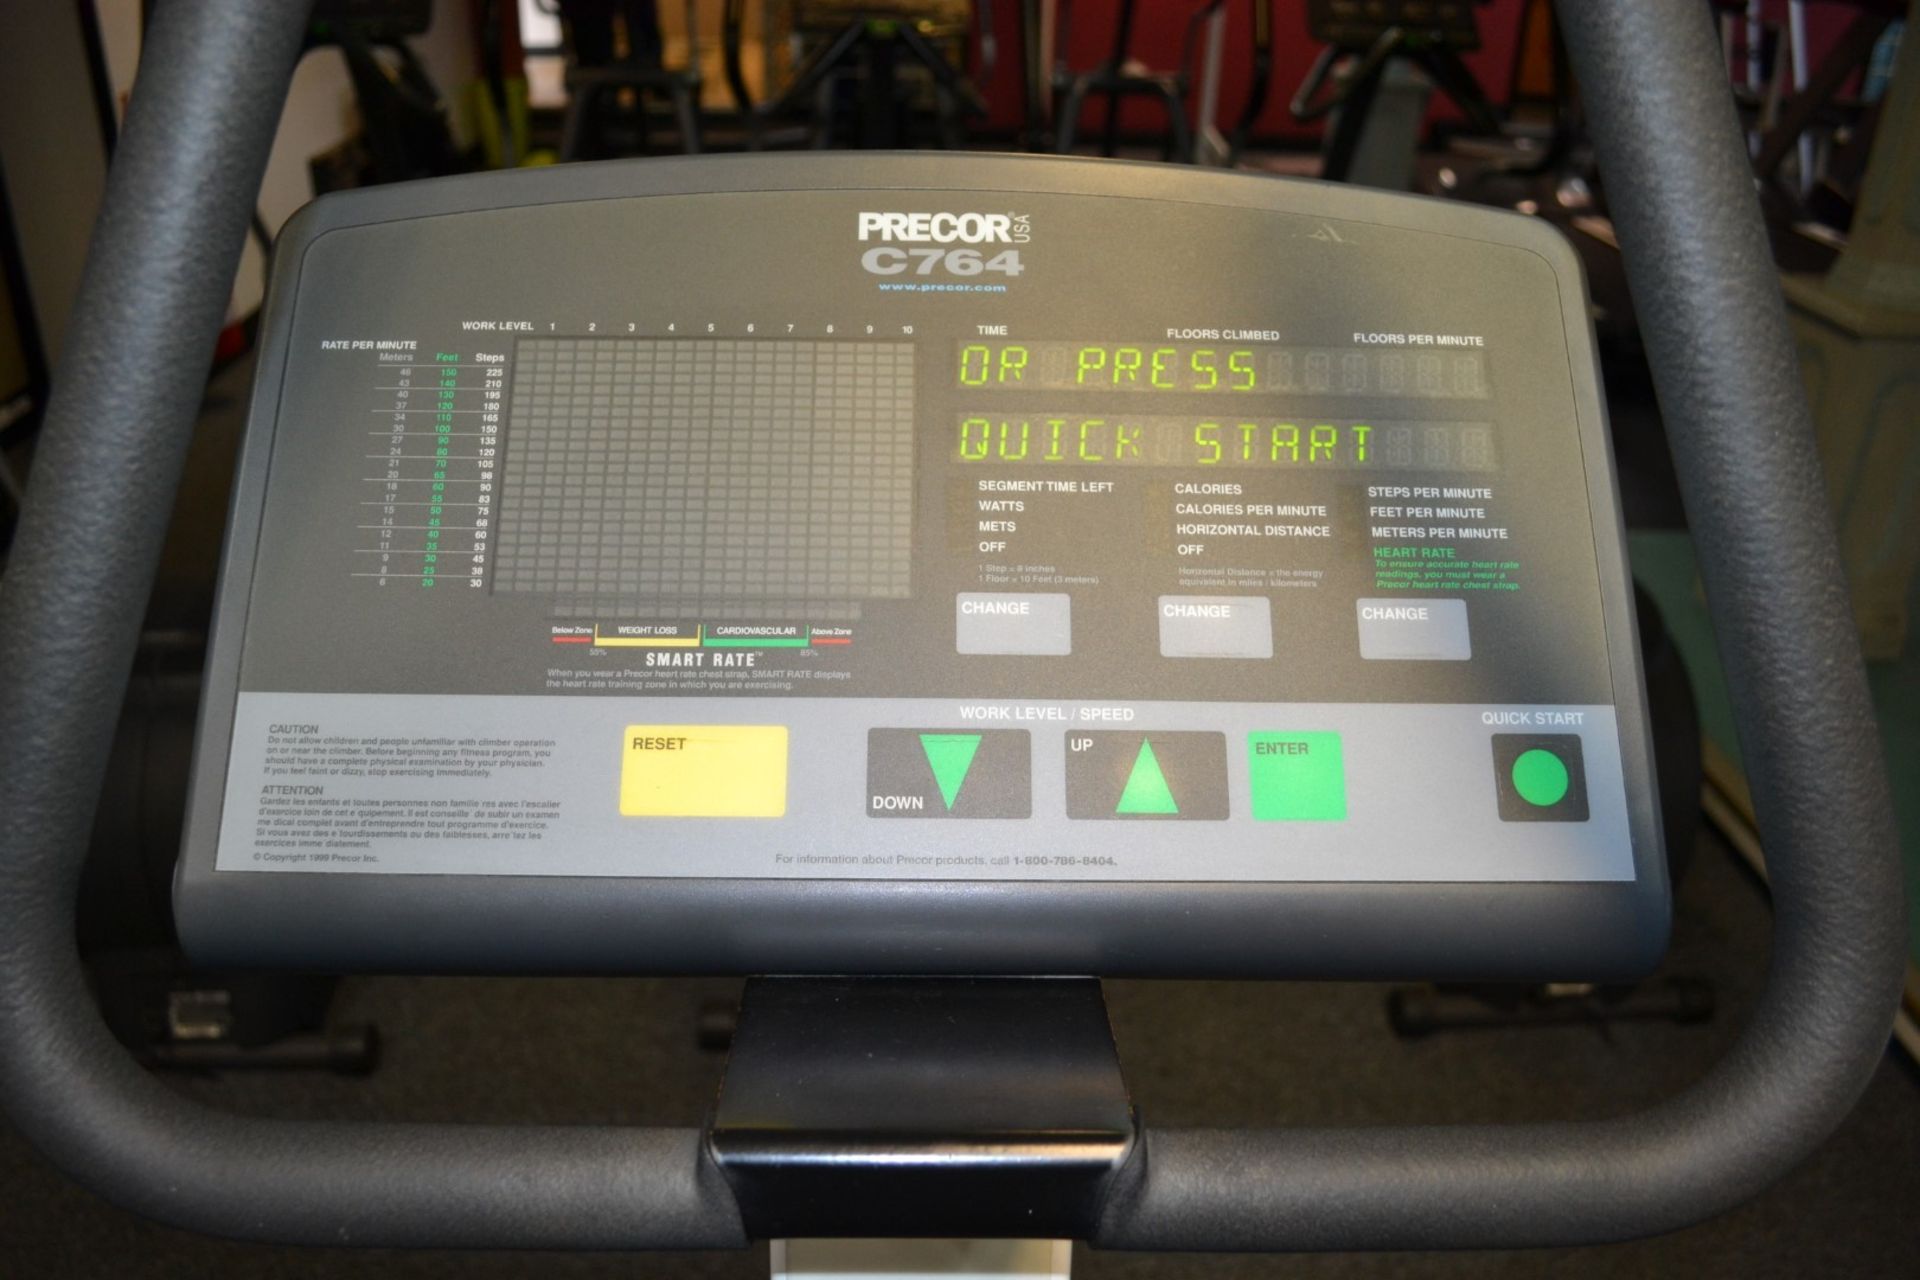 1 x Precor C764 Stairclimber Step Exercise Machine - Dimensions: H70 x L125 x W60cm  - Ref: J2043/ - Image 3 of 3